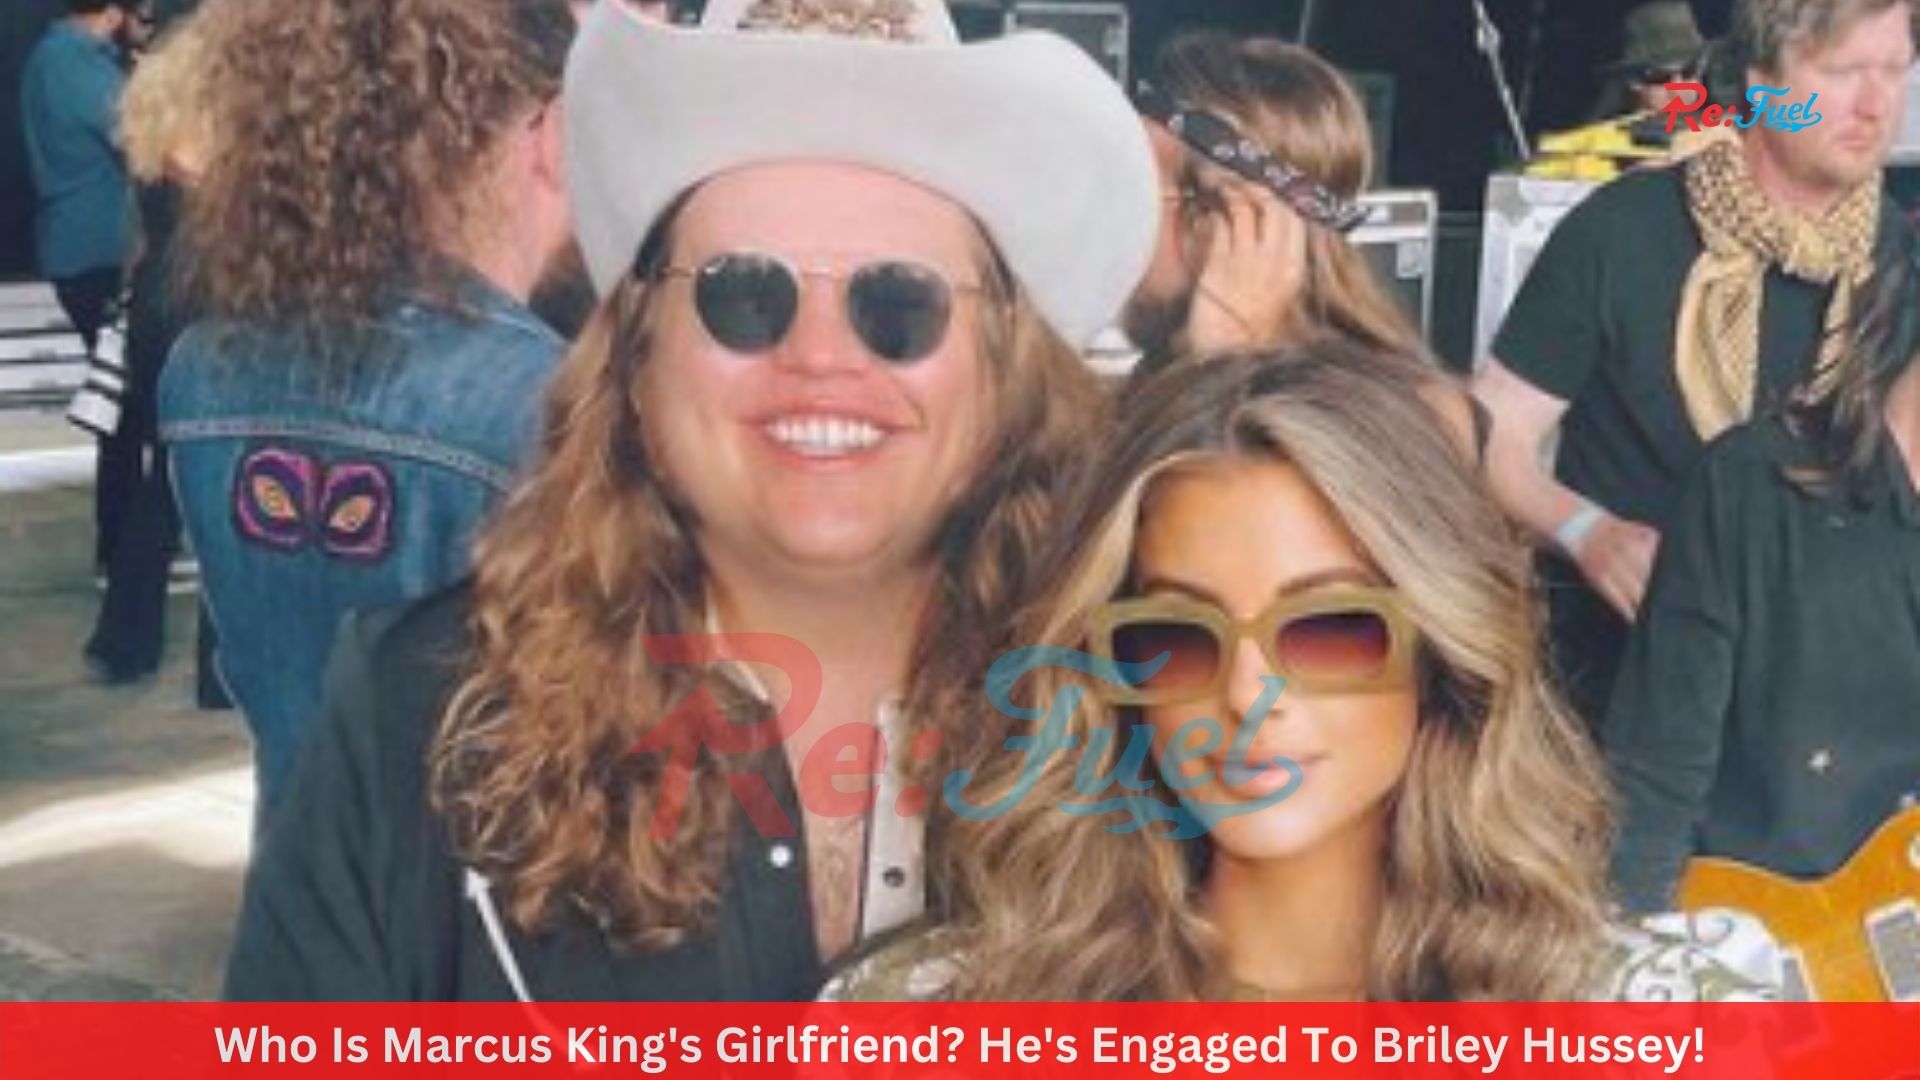 Who Is Marcus King's Girlfriend? He's Engaged To Briley Hussey!